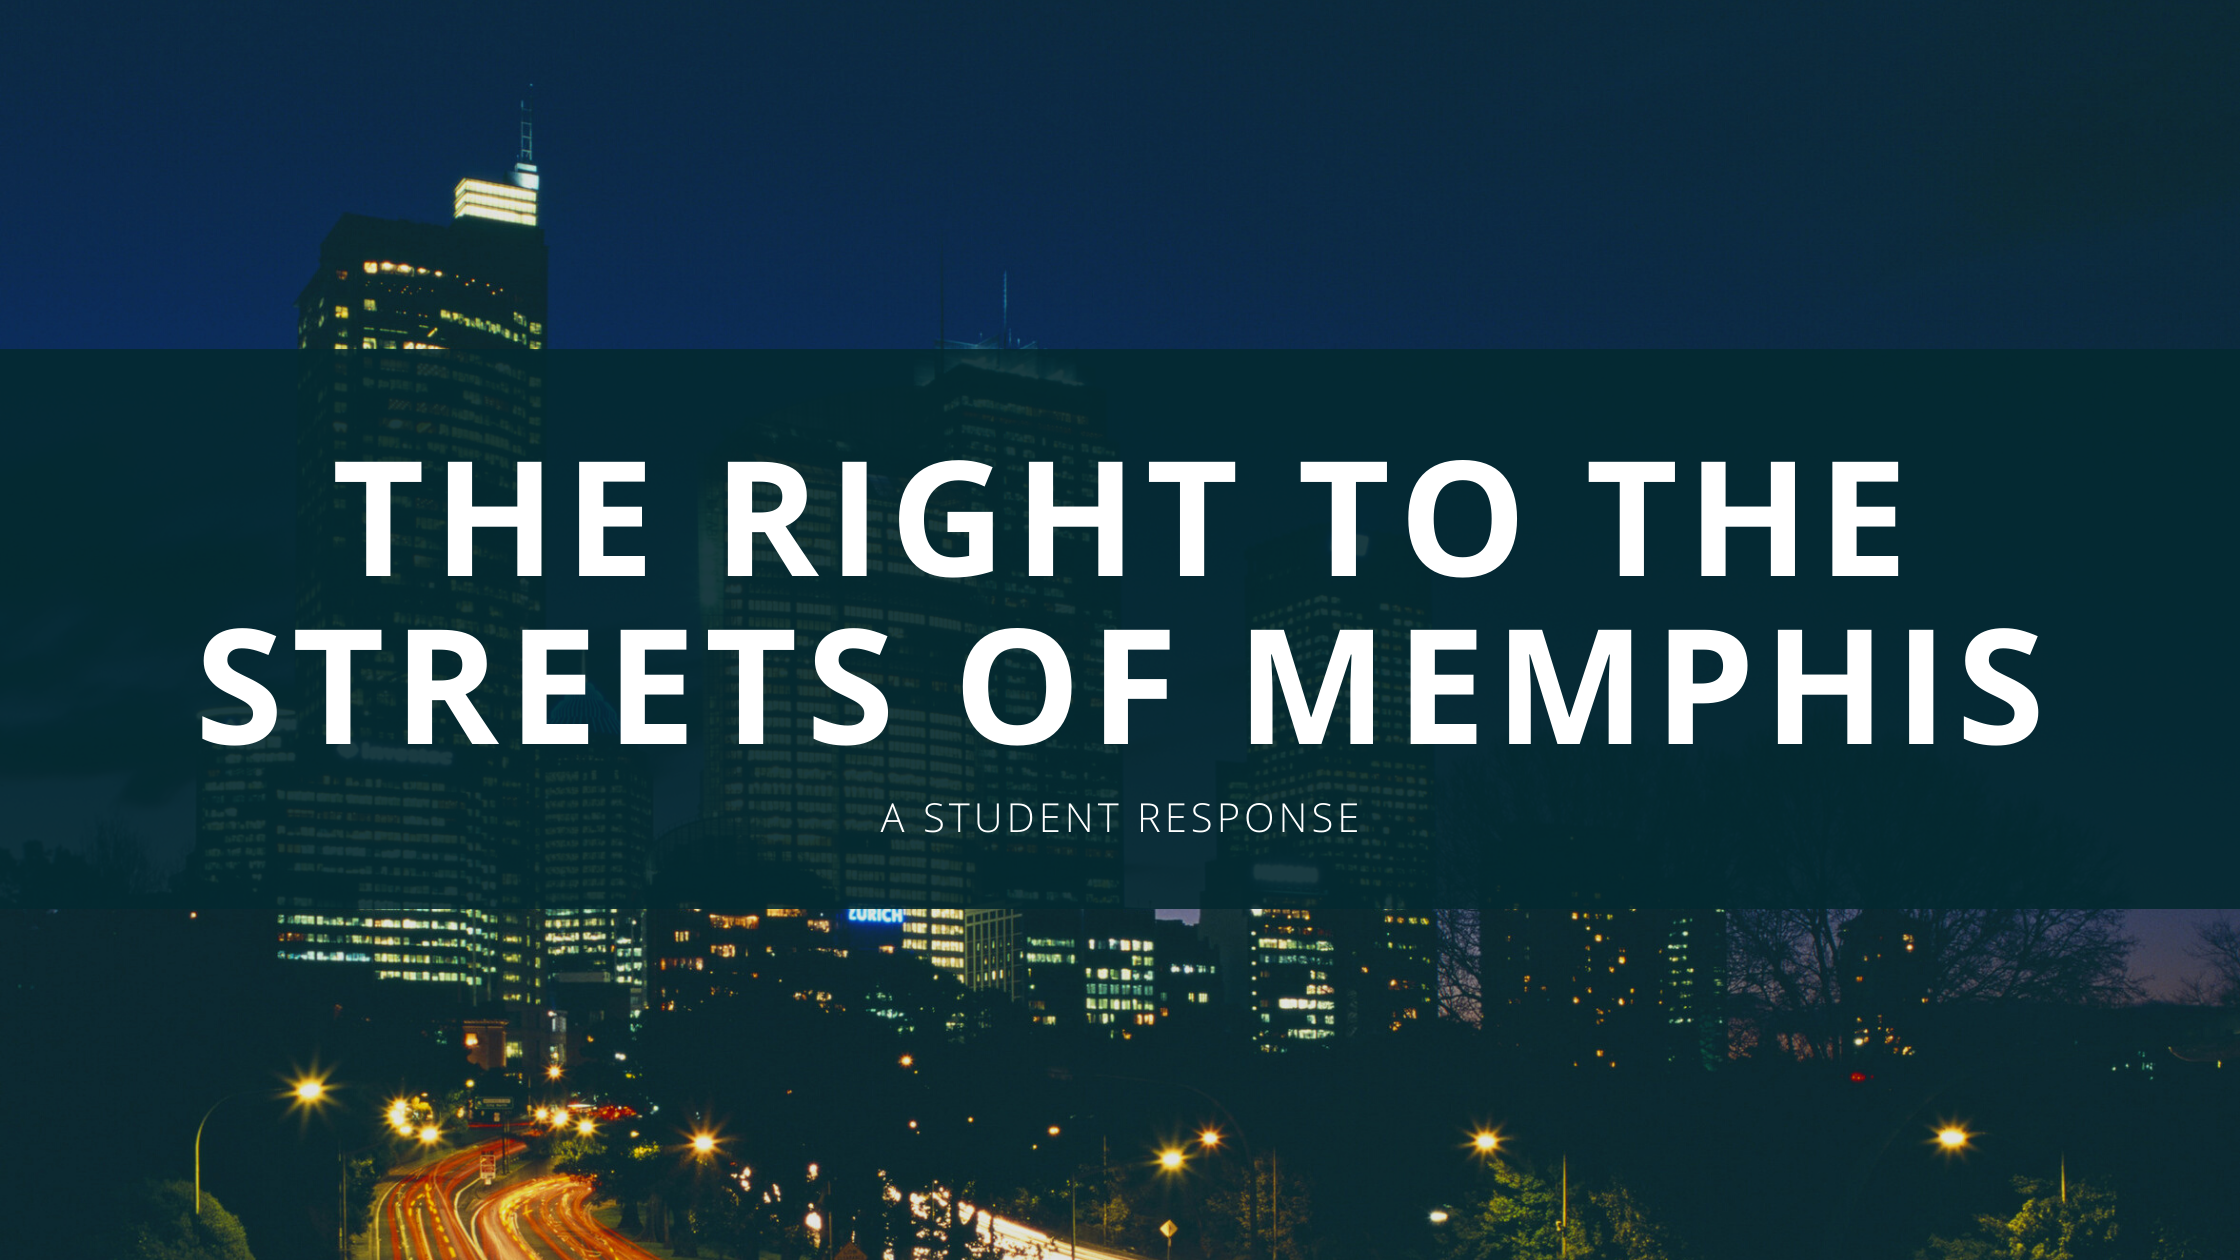 You are currently viewing Student Response to “The Right to the Streets of Memphis” in 2021